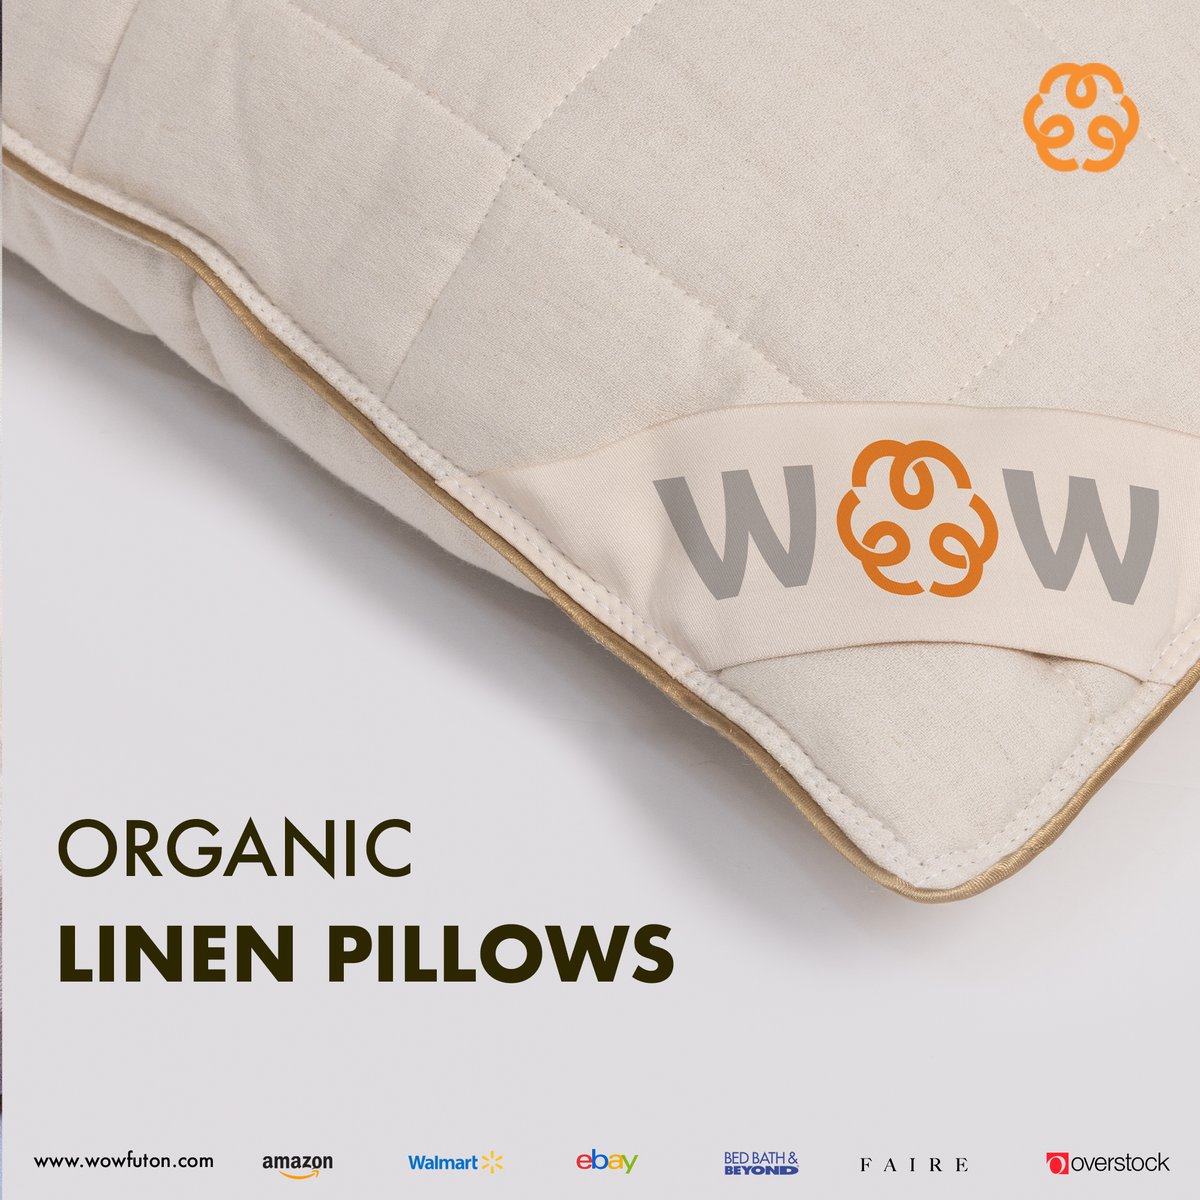 Oh, that luxurious linen feeling when you put your head on the pillow, with its unique breathable feature.
 
🧡 Discover organic sleep at WoWFuton.com
 
#wowfuton
#organicsleep
#organicbedding
#amazon
#walmart
#ebay
#overstock
#bedbathandbeyond
#faire